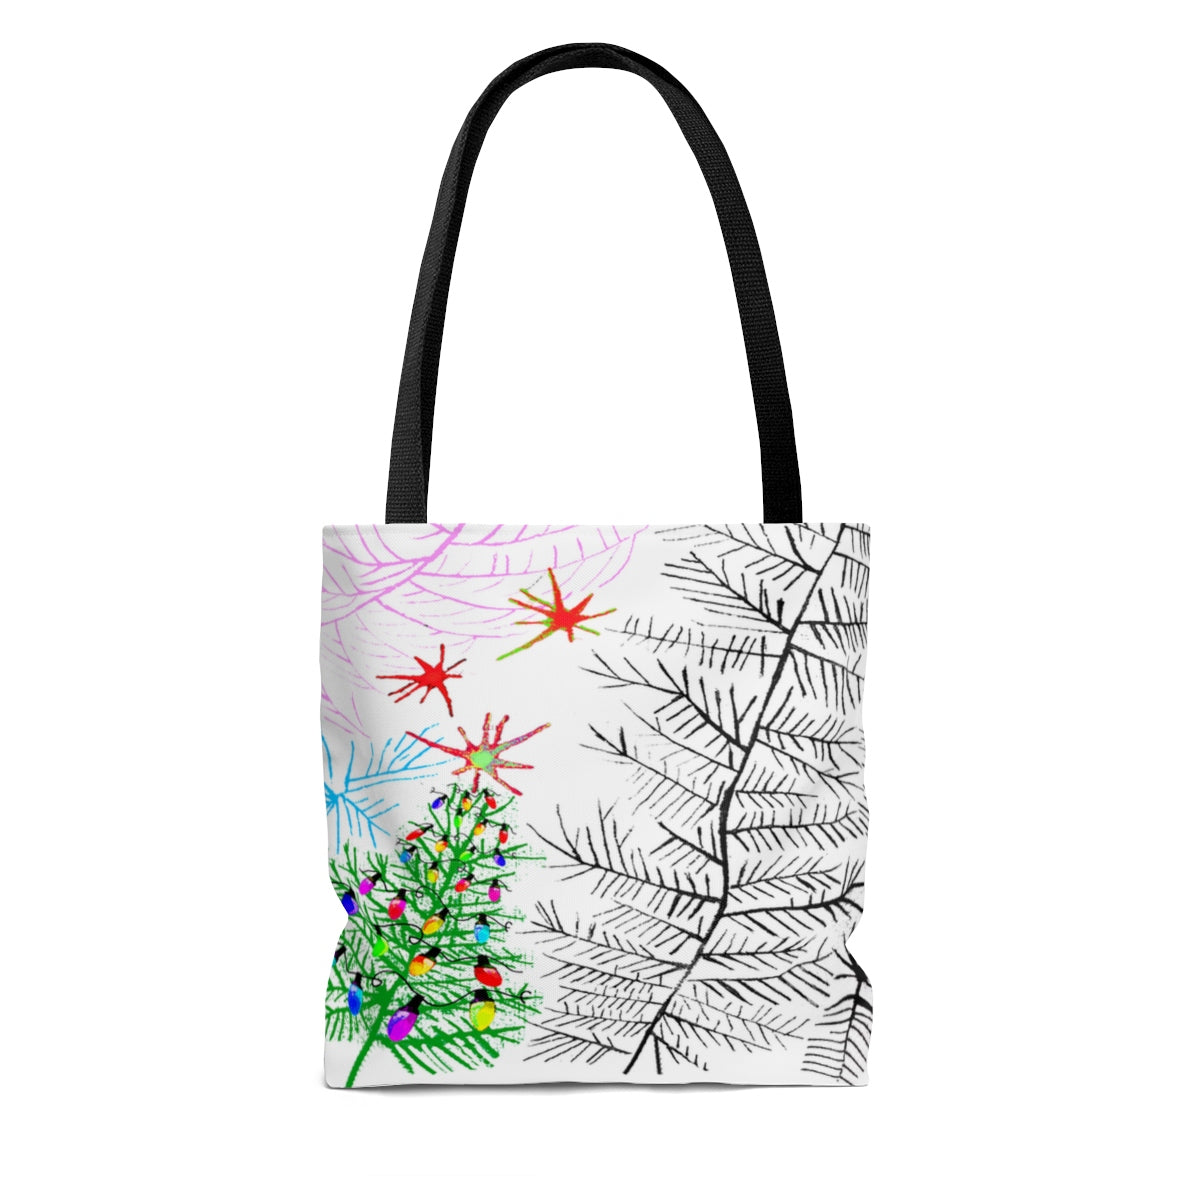 Branches & stars Tote Bag